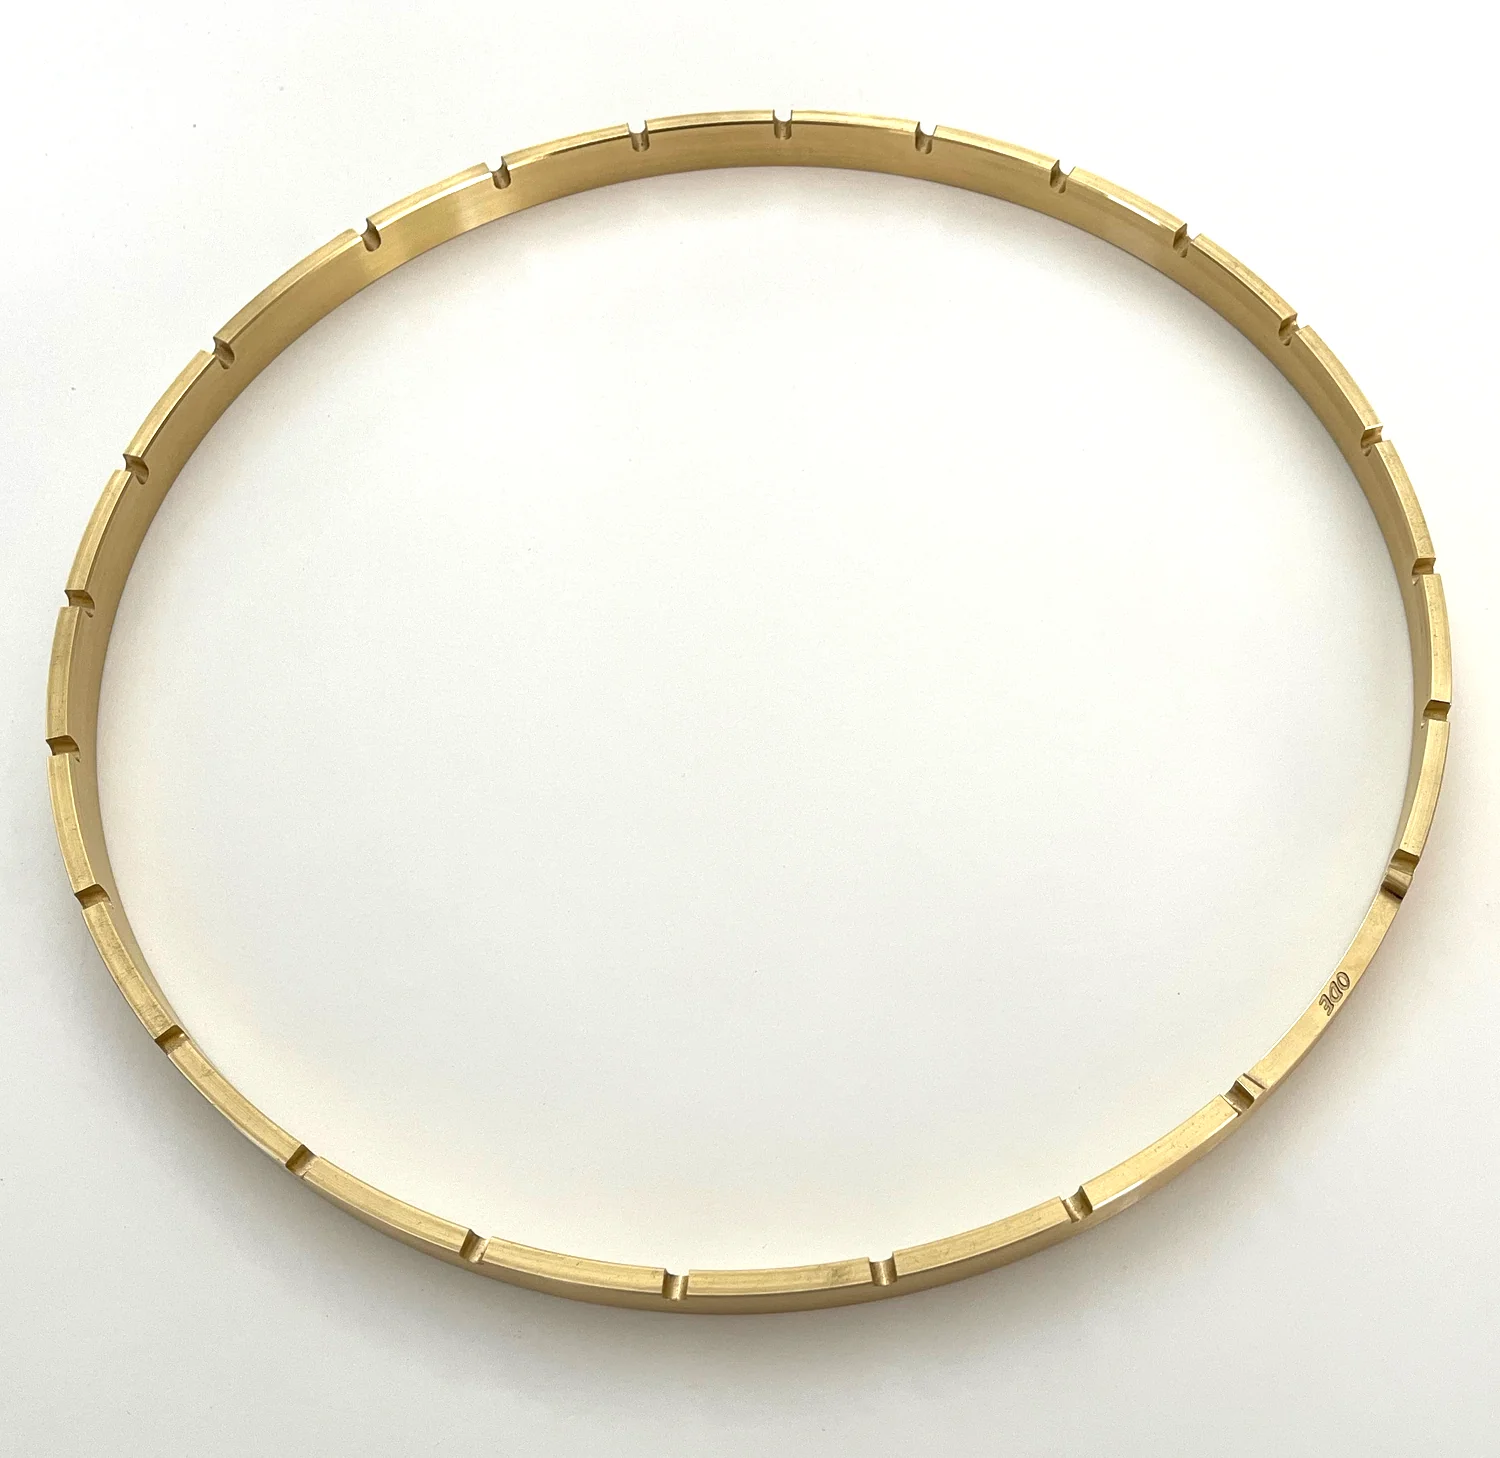 11 inch notched brass banjo tension hoop